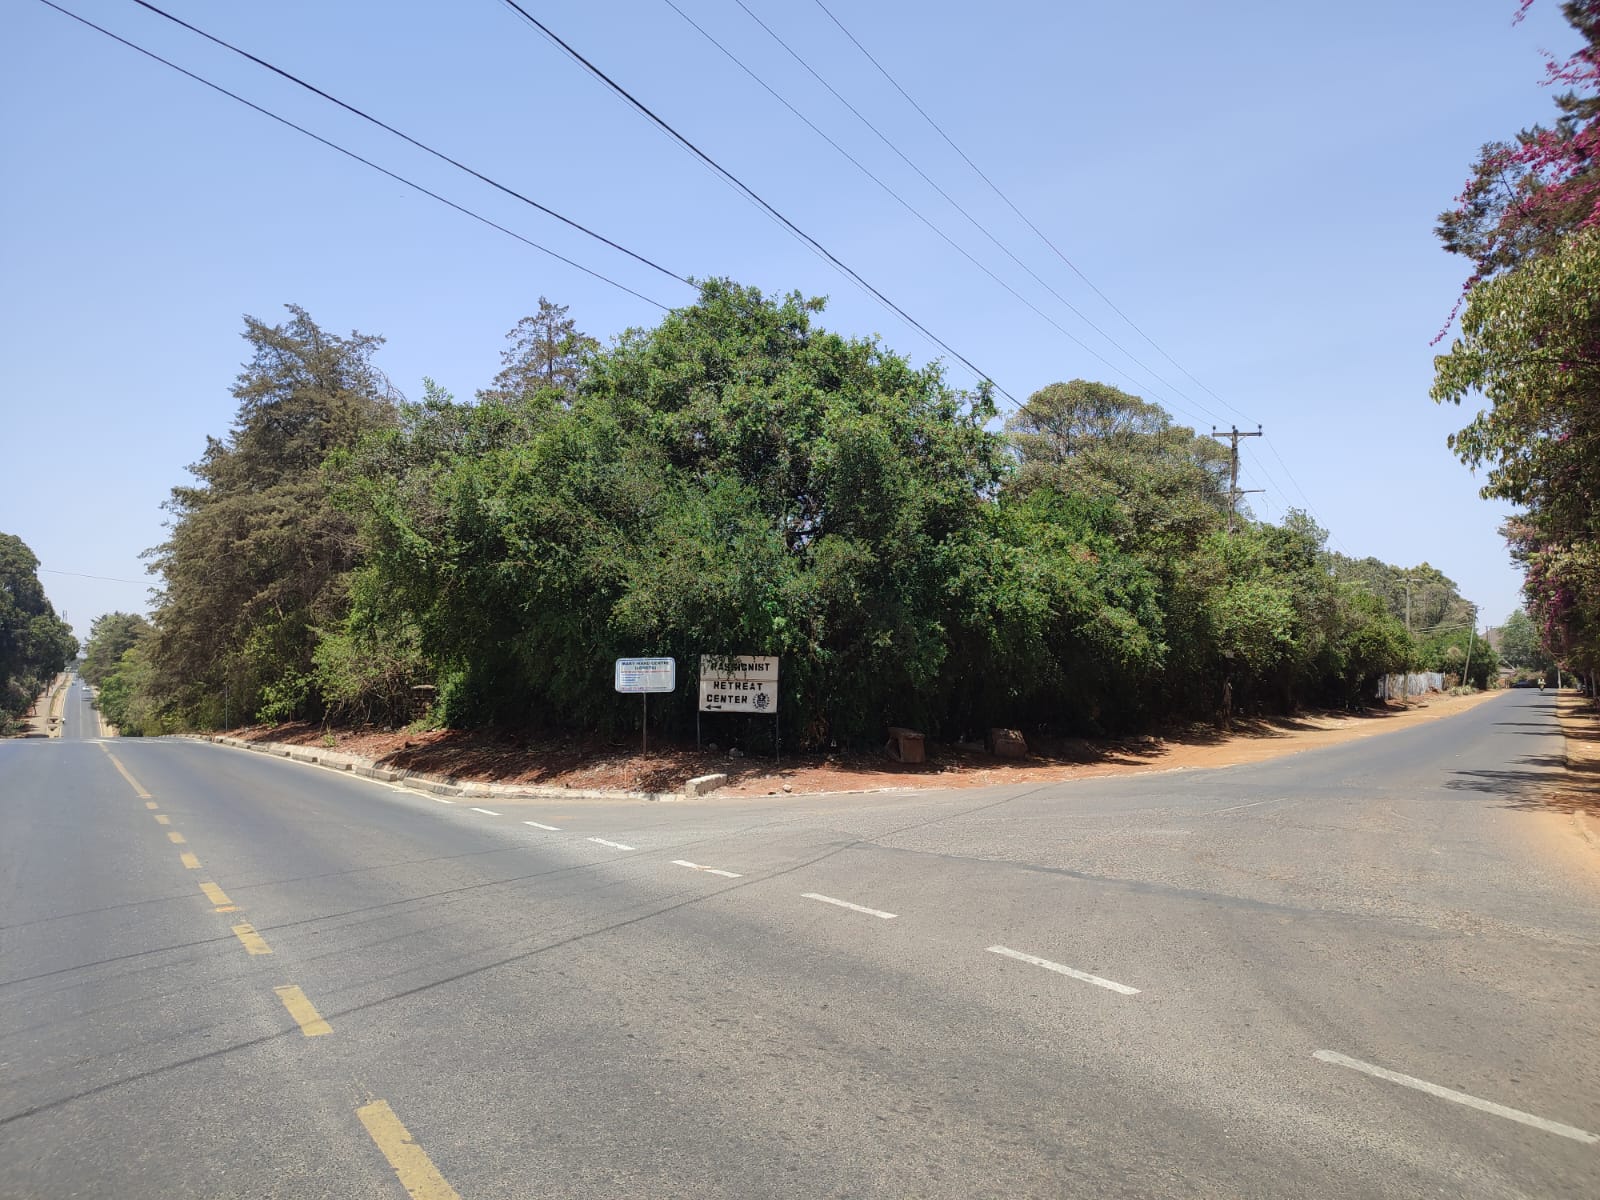 Karen land for sale 1/2 Half Acre Hardy Masai West Road Ready Tittle Deed Exclusive!